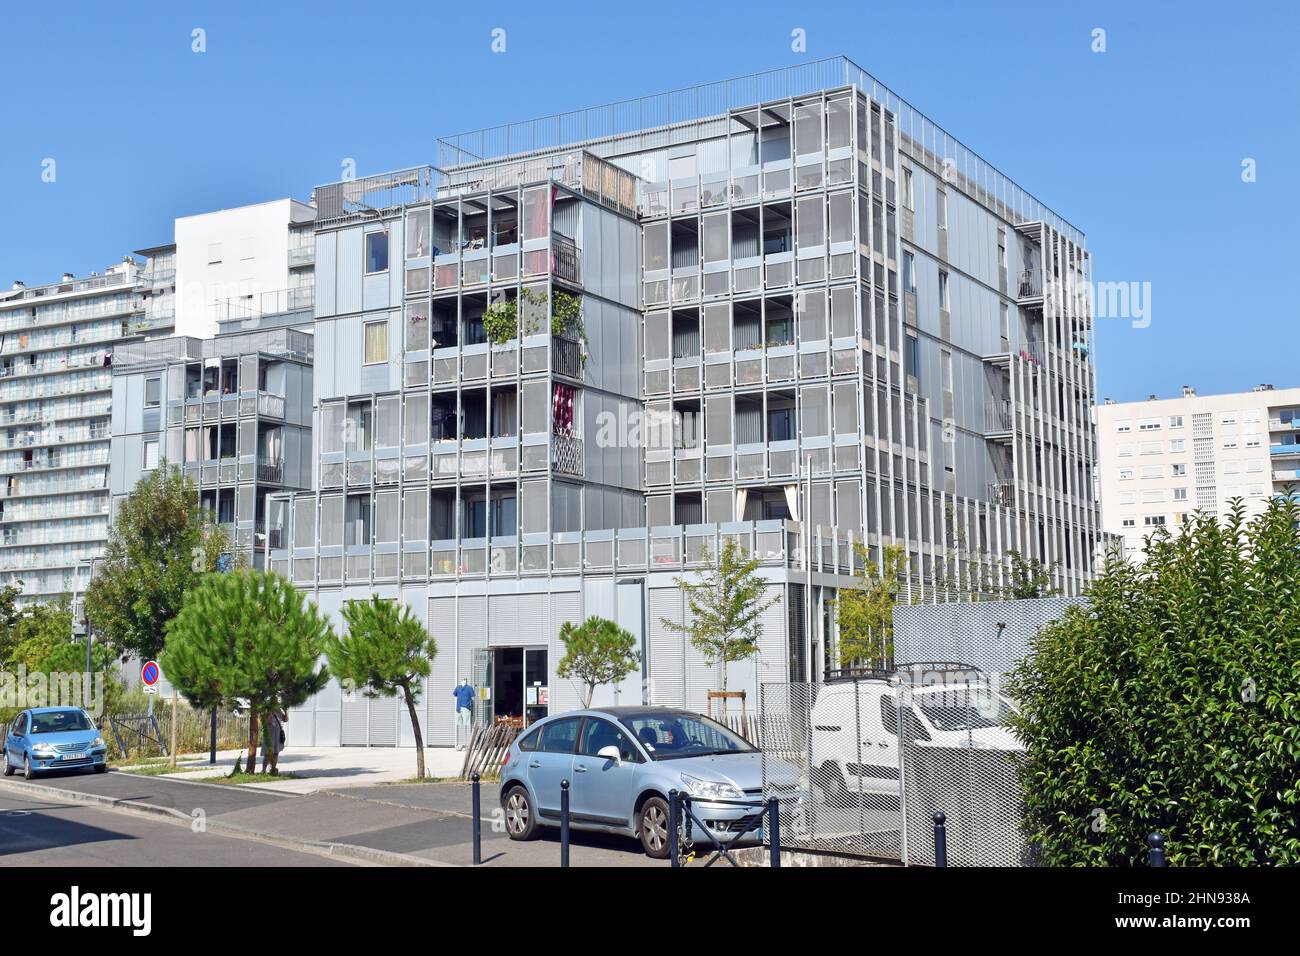 Five floors of high-tech residential apartments above ground floor, almost entirely glass and metal, sunscreening grills, recessed balconies, Stock Photo